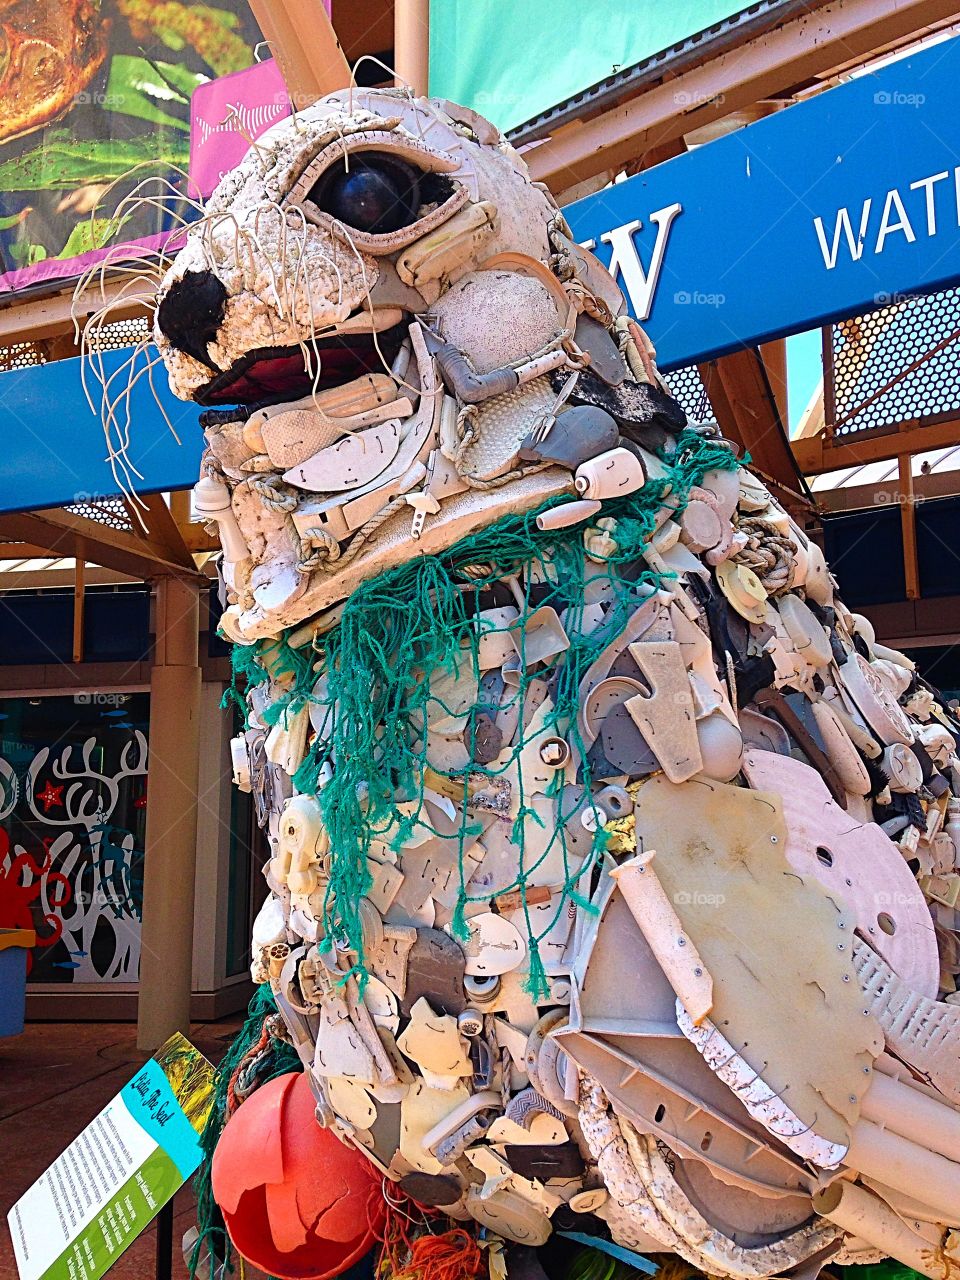 Lidia the seal . Ocean sculpture made out of ocean trash 